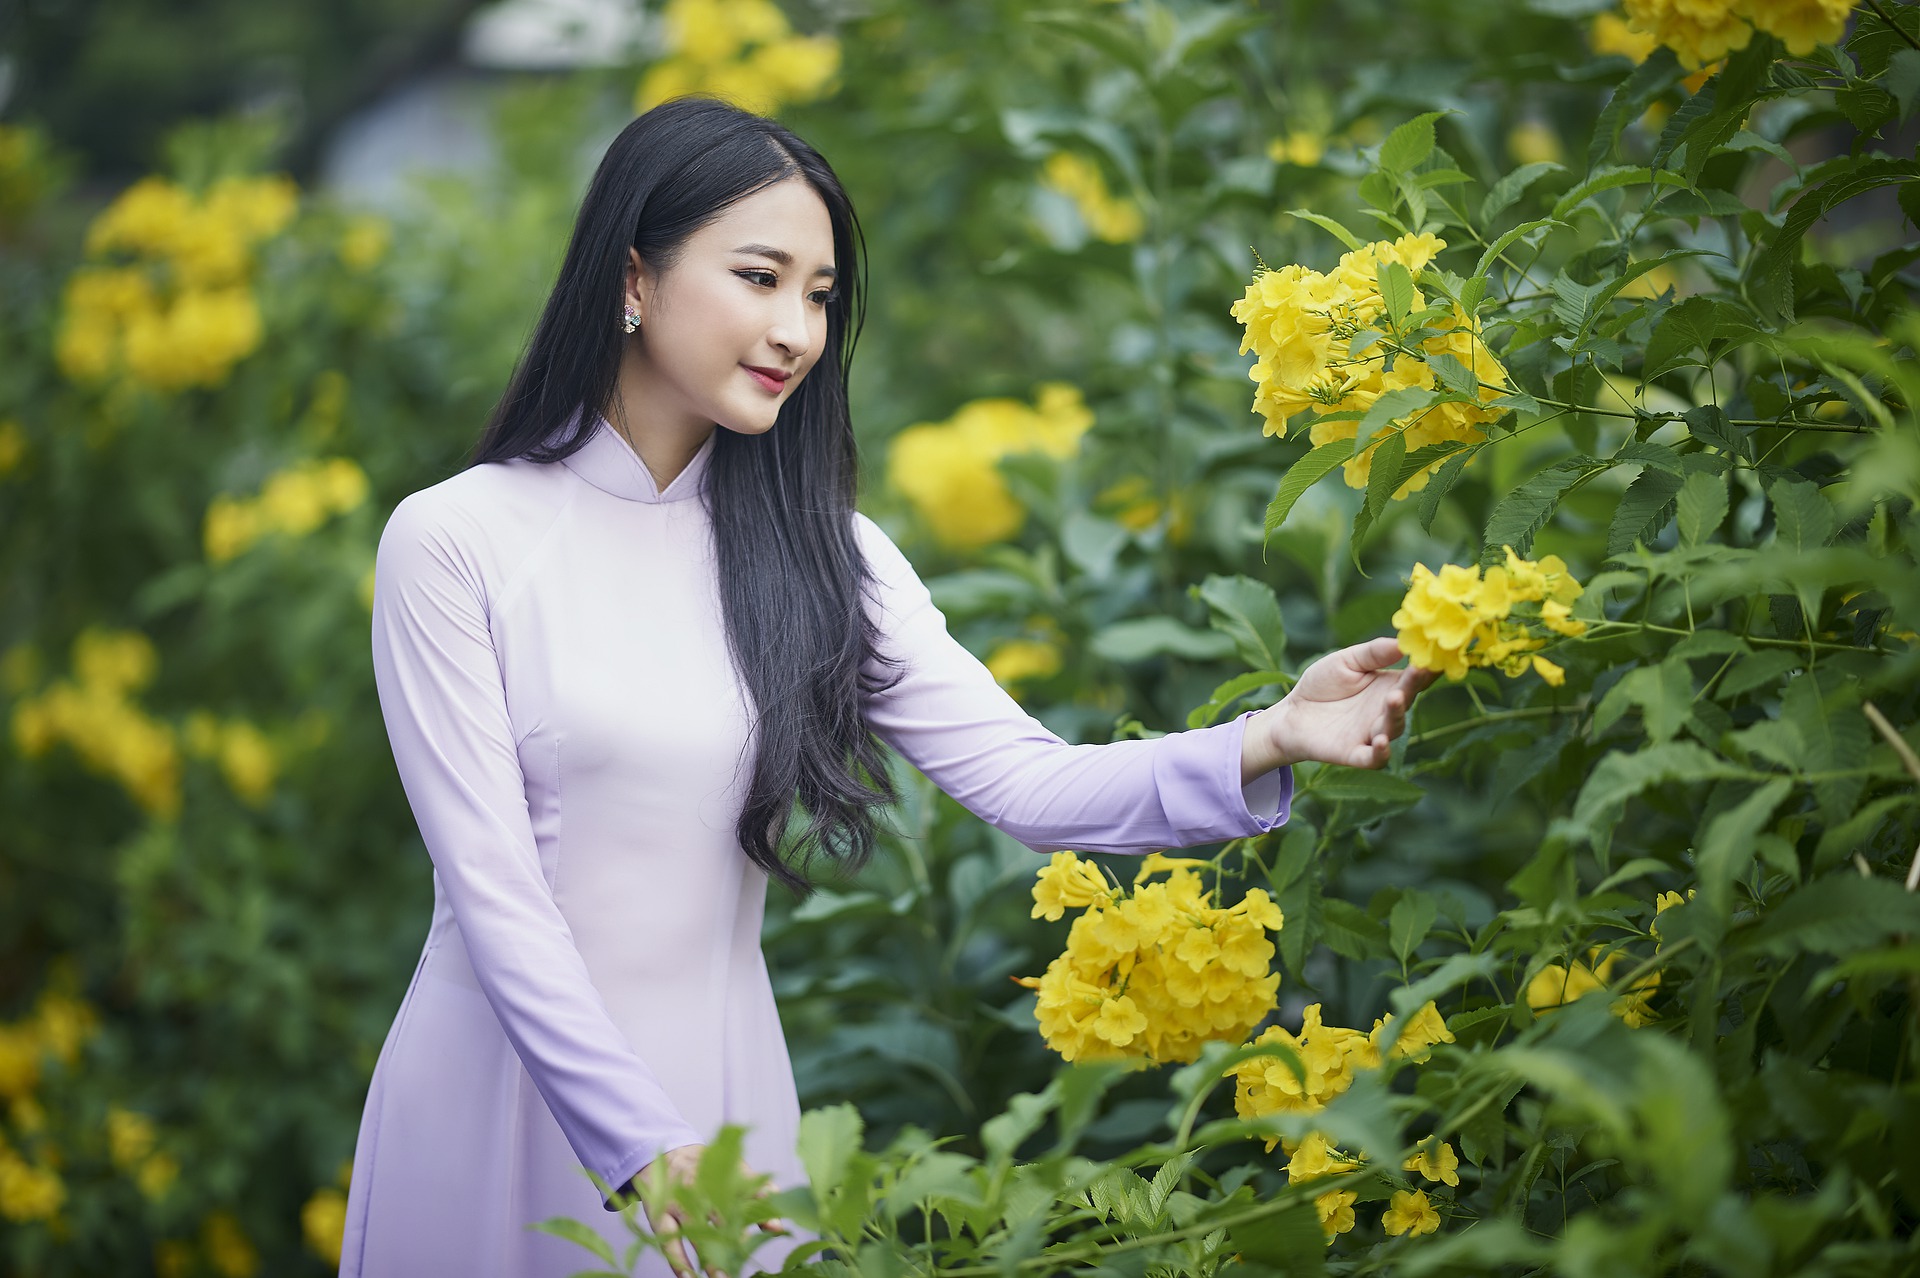 Dating Chinese Women of Your Dreams in 2022